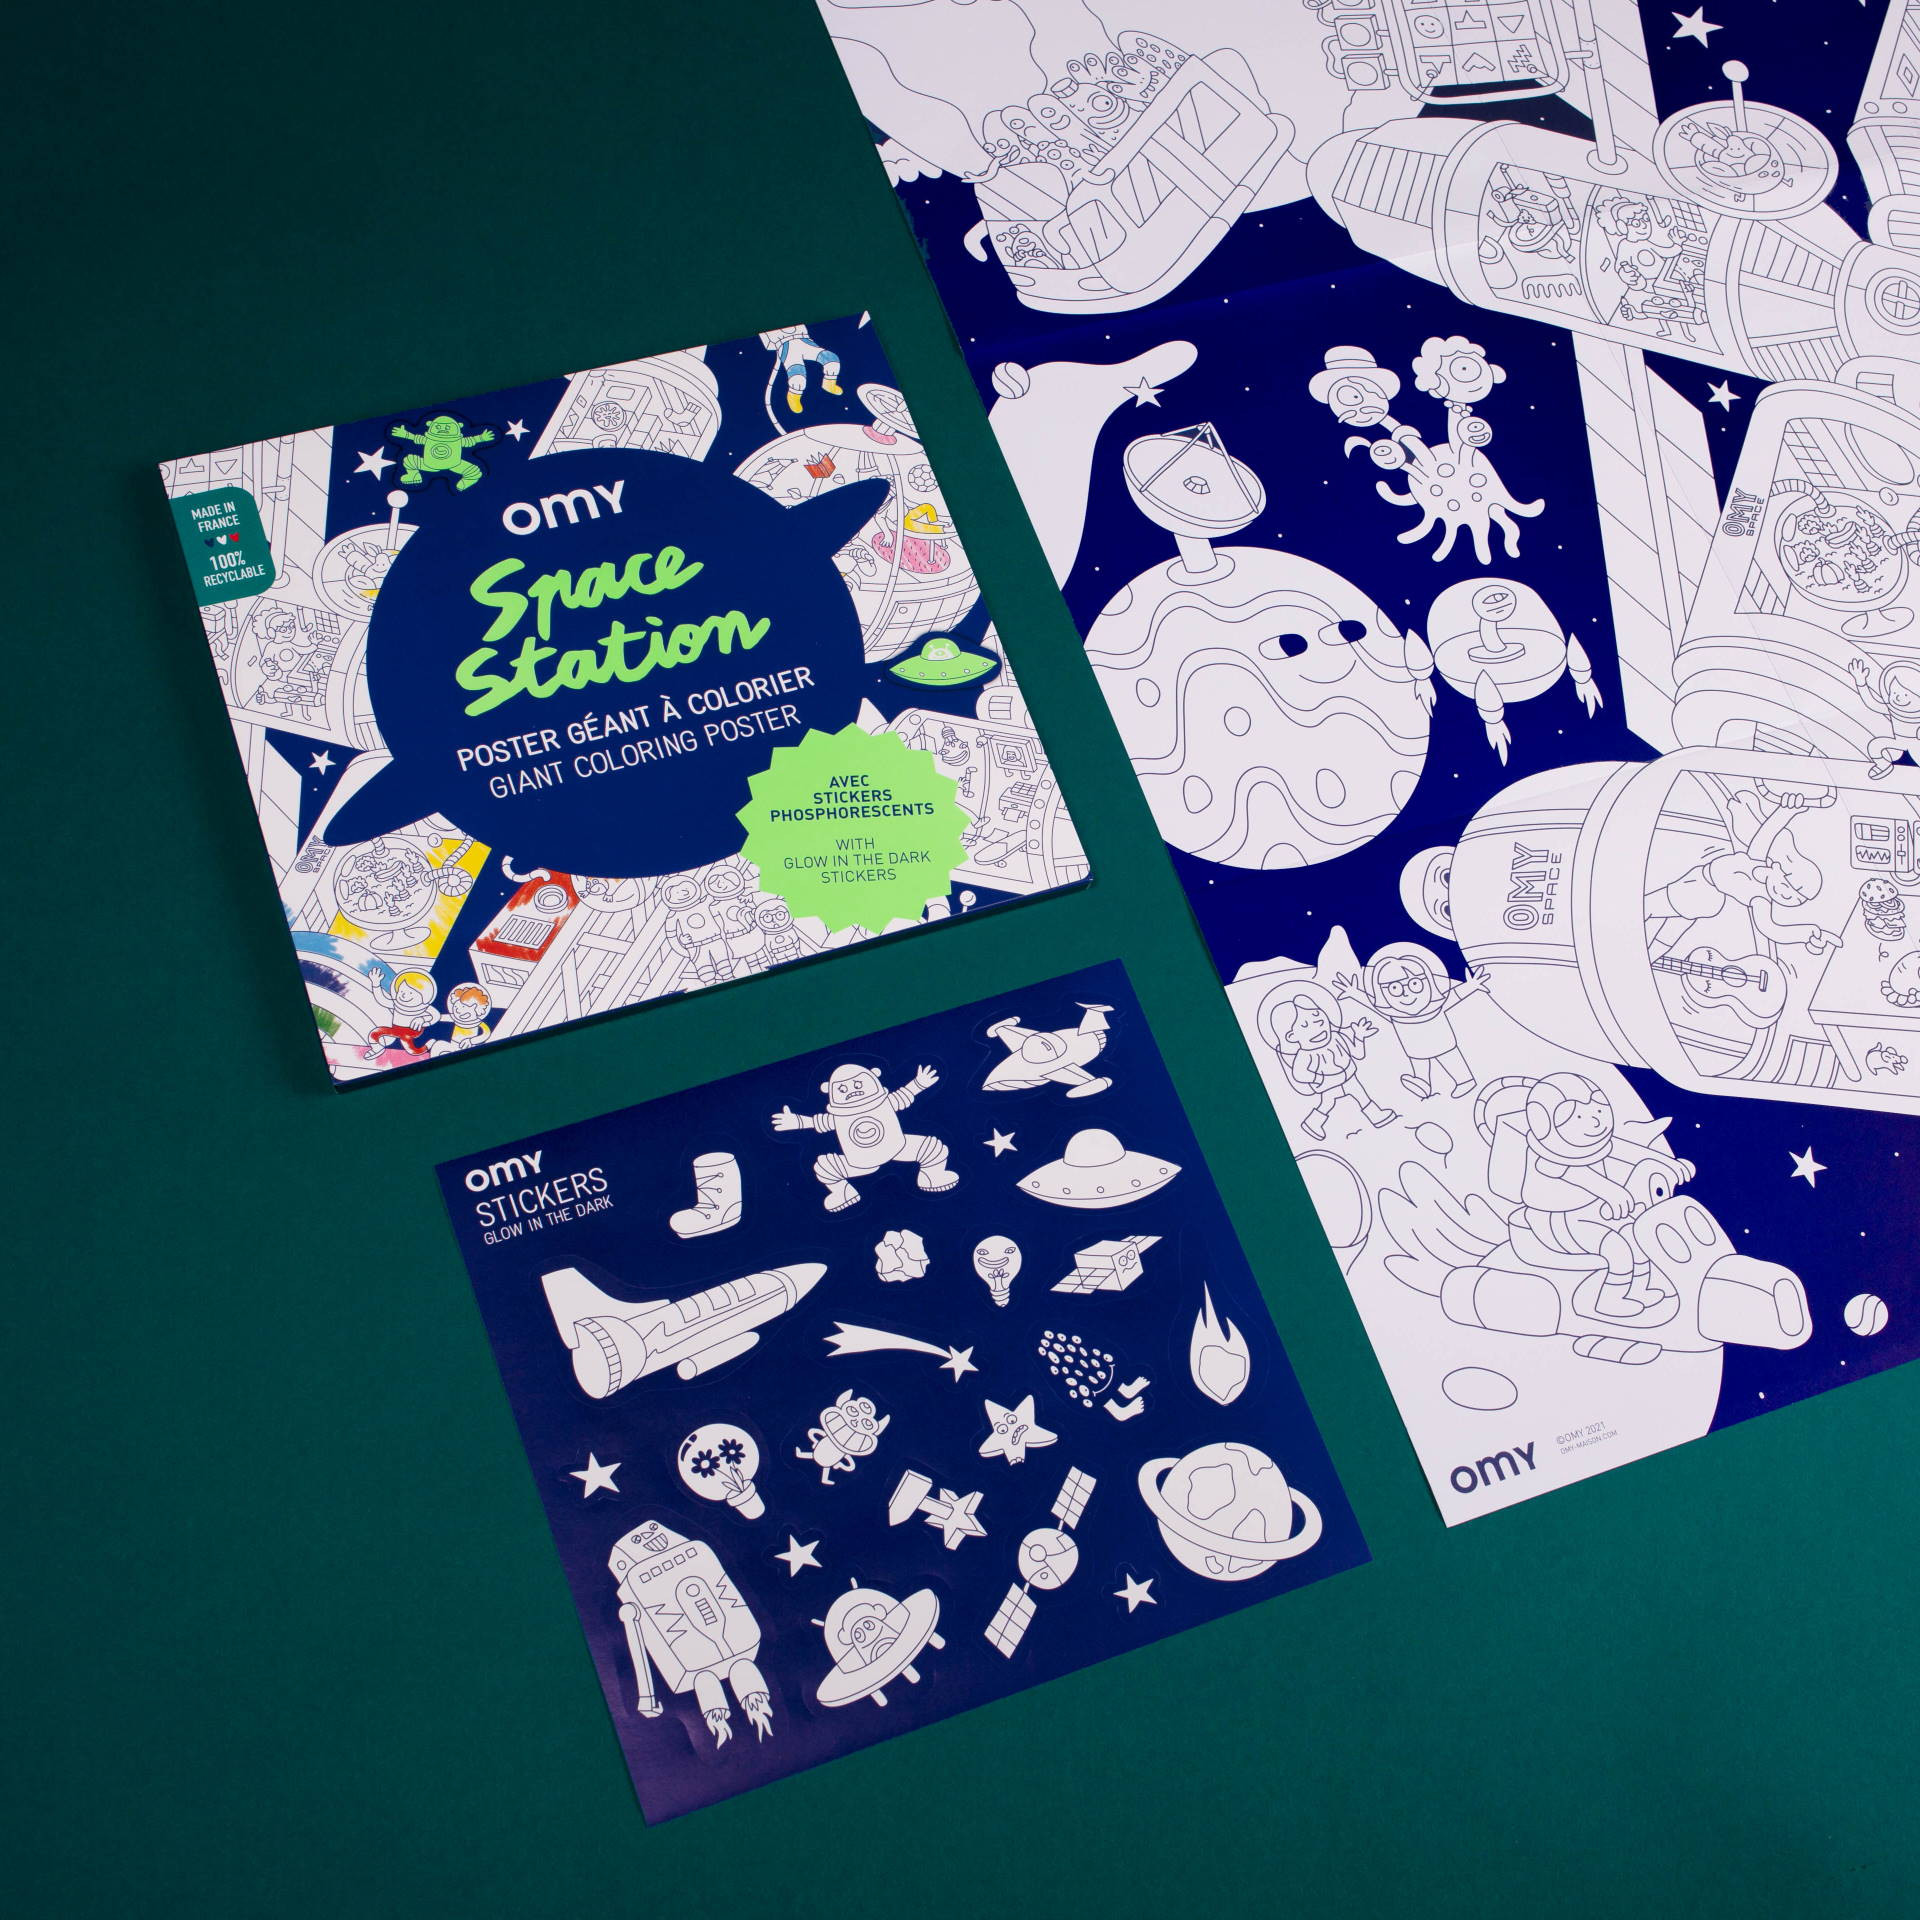 Poster géant Space station + stickers phosphorescents - OMY